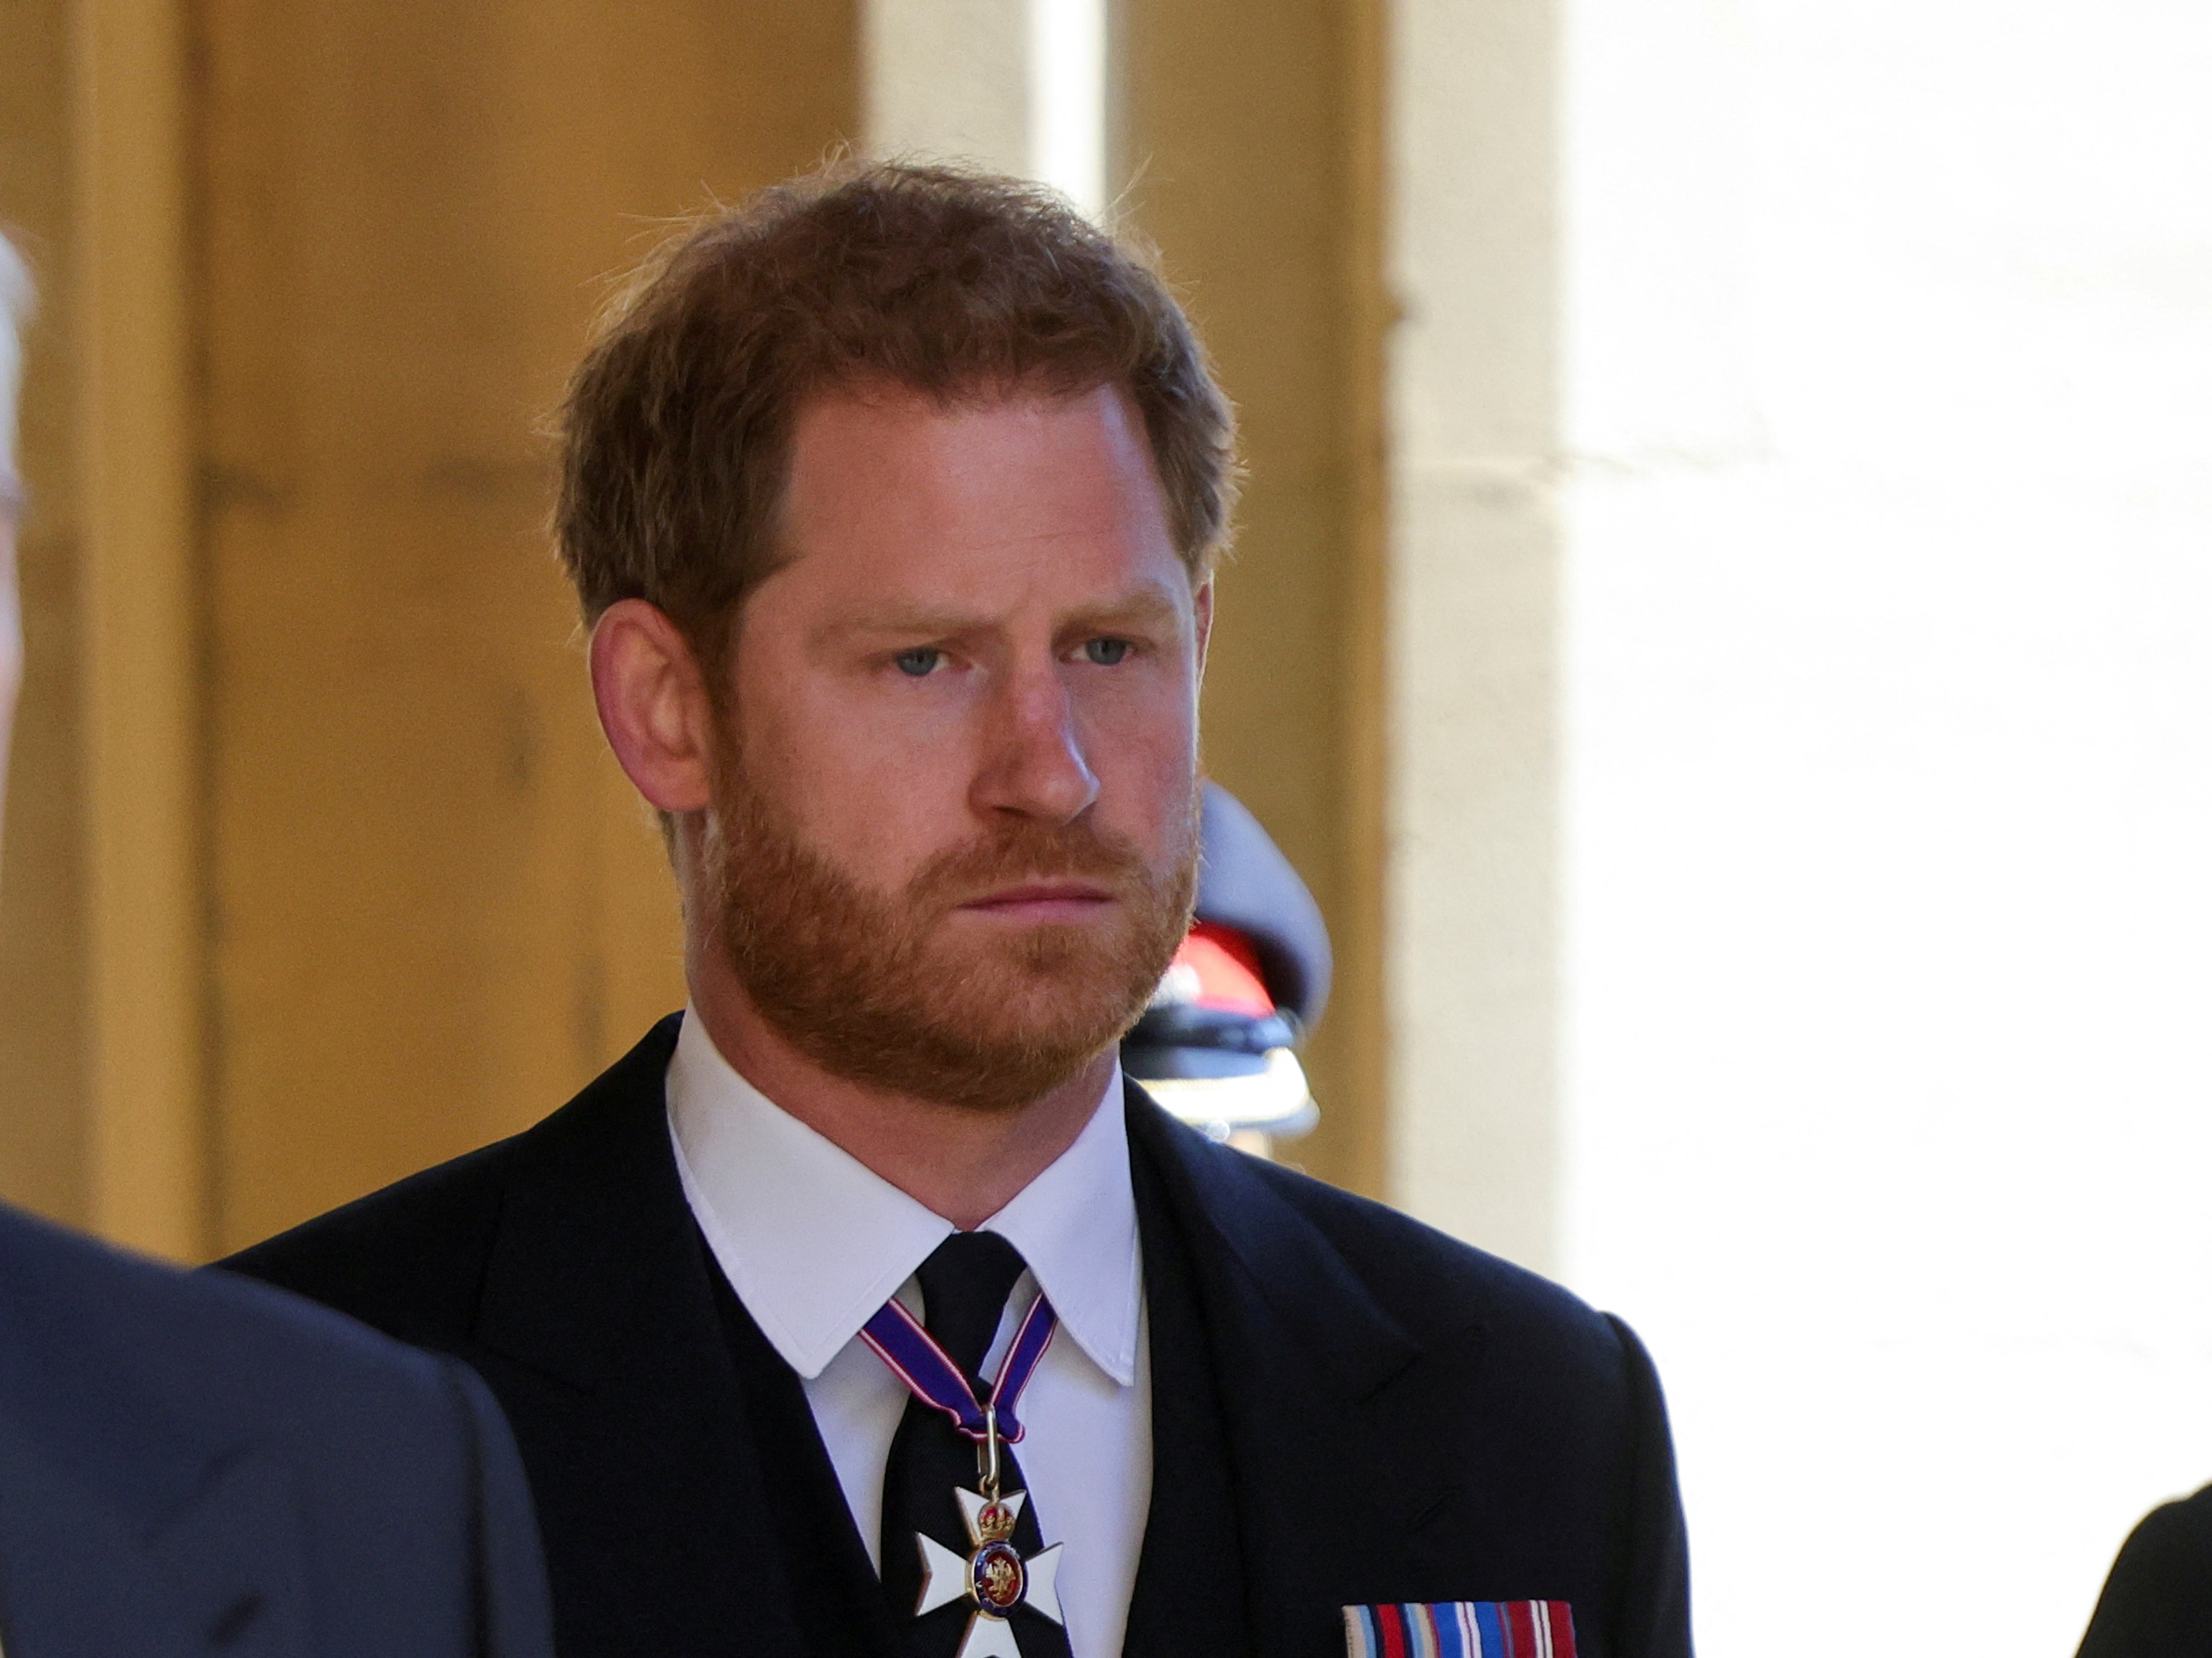 Prince Harry, the Duke of Sussex, is bringing a legal challenge against a Home Office decision to change his level of police protection in the UK